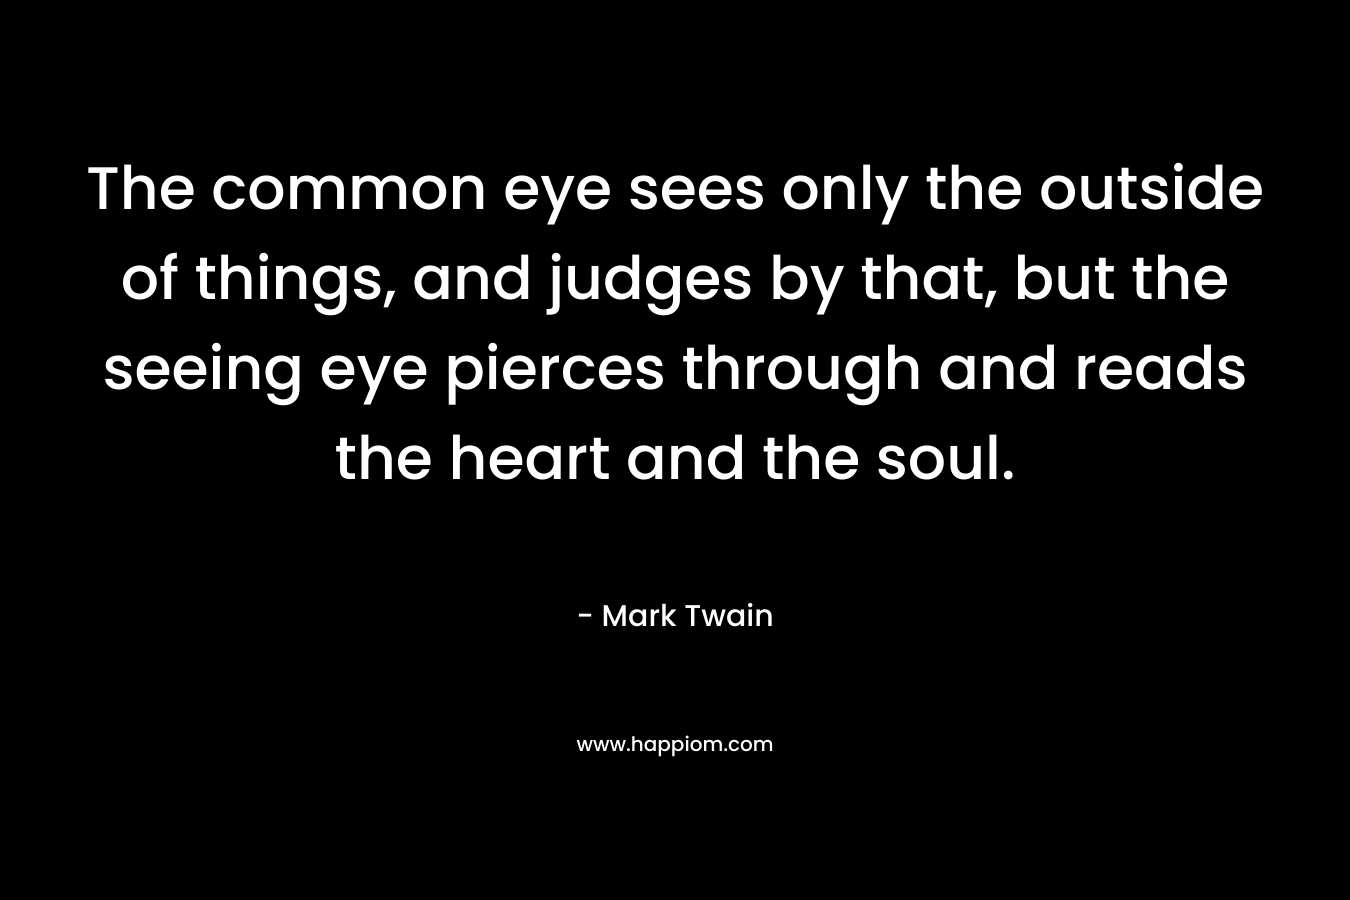 The common eye sees only the outside of things, and judges by that, but the seeing eye pierces through and reads the heart and the soul.